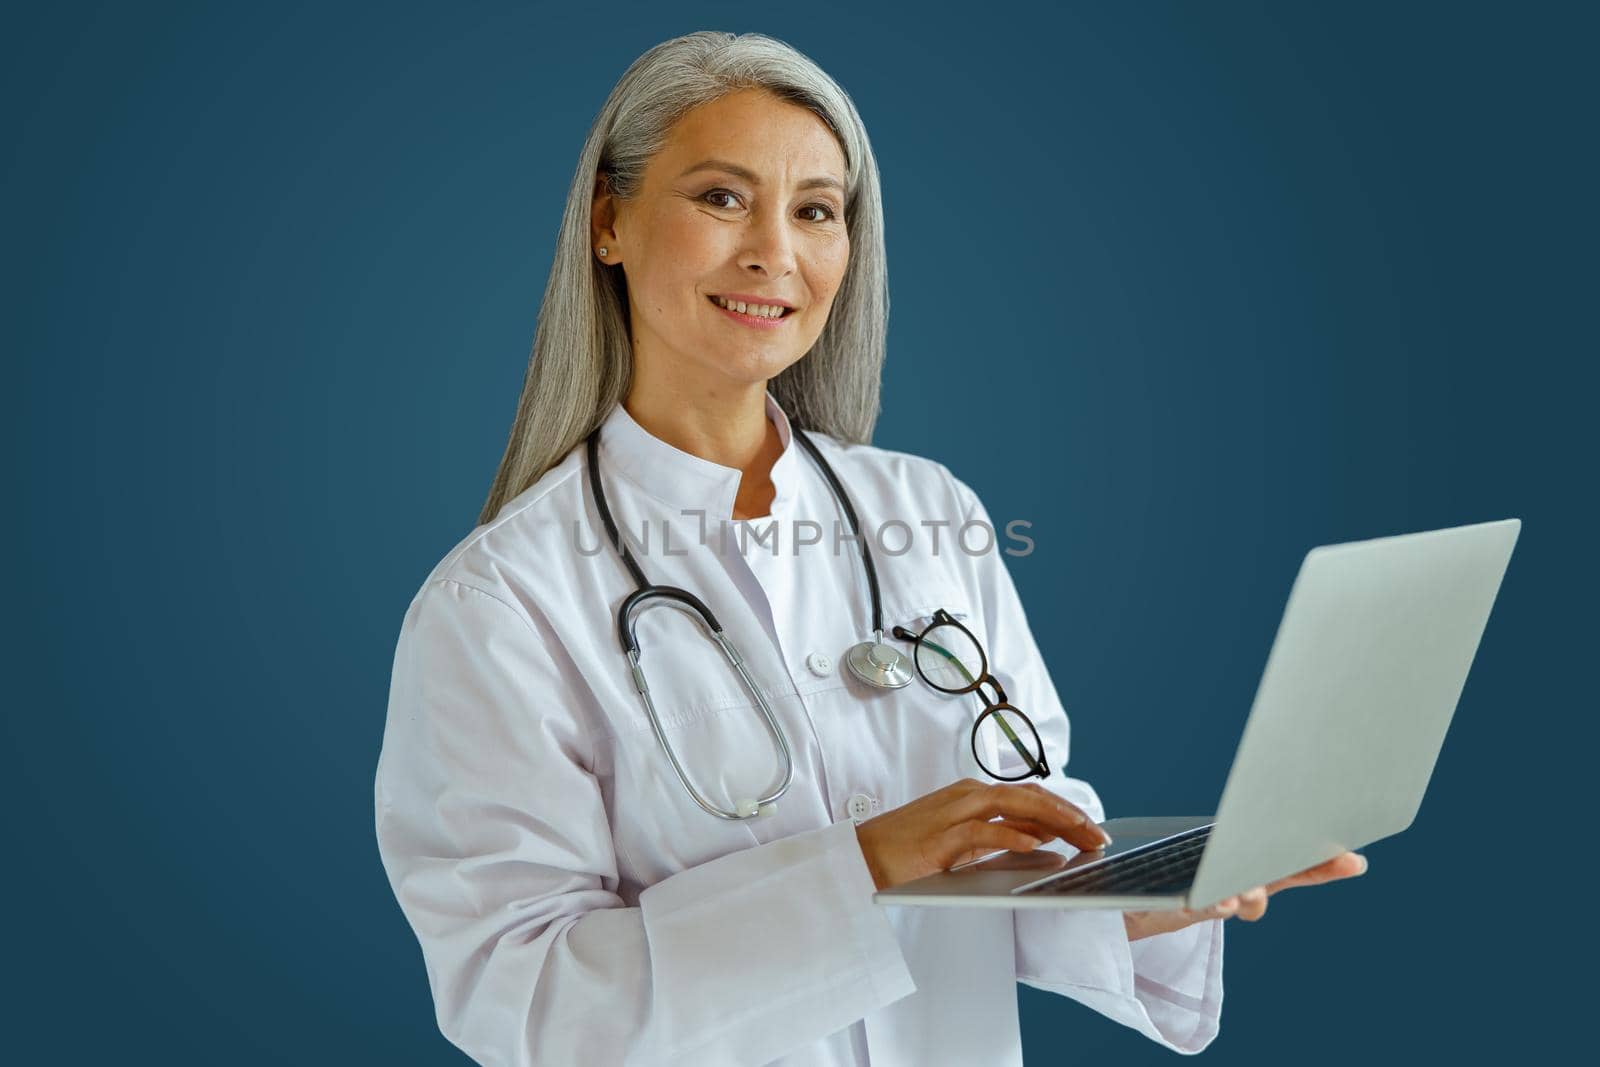 Smiling mature woman doctor in white coat works on laptop standing on blue background by Yaroslav_astakhov